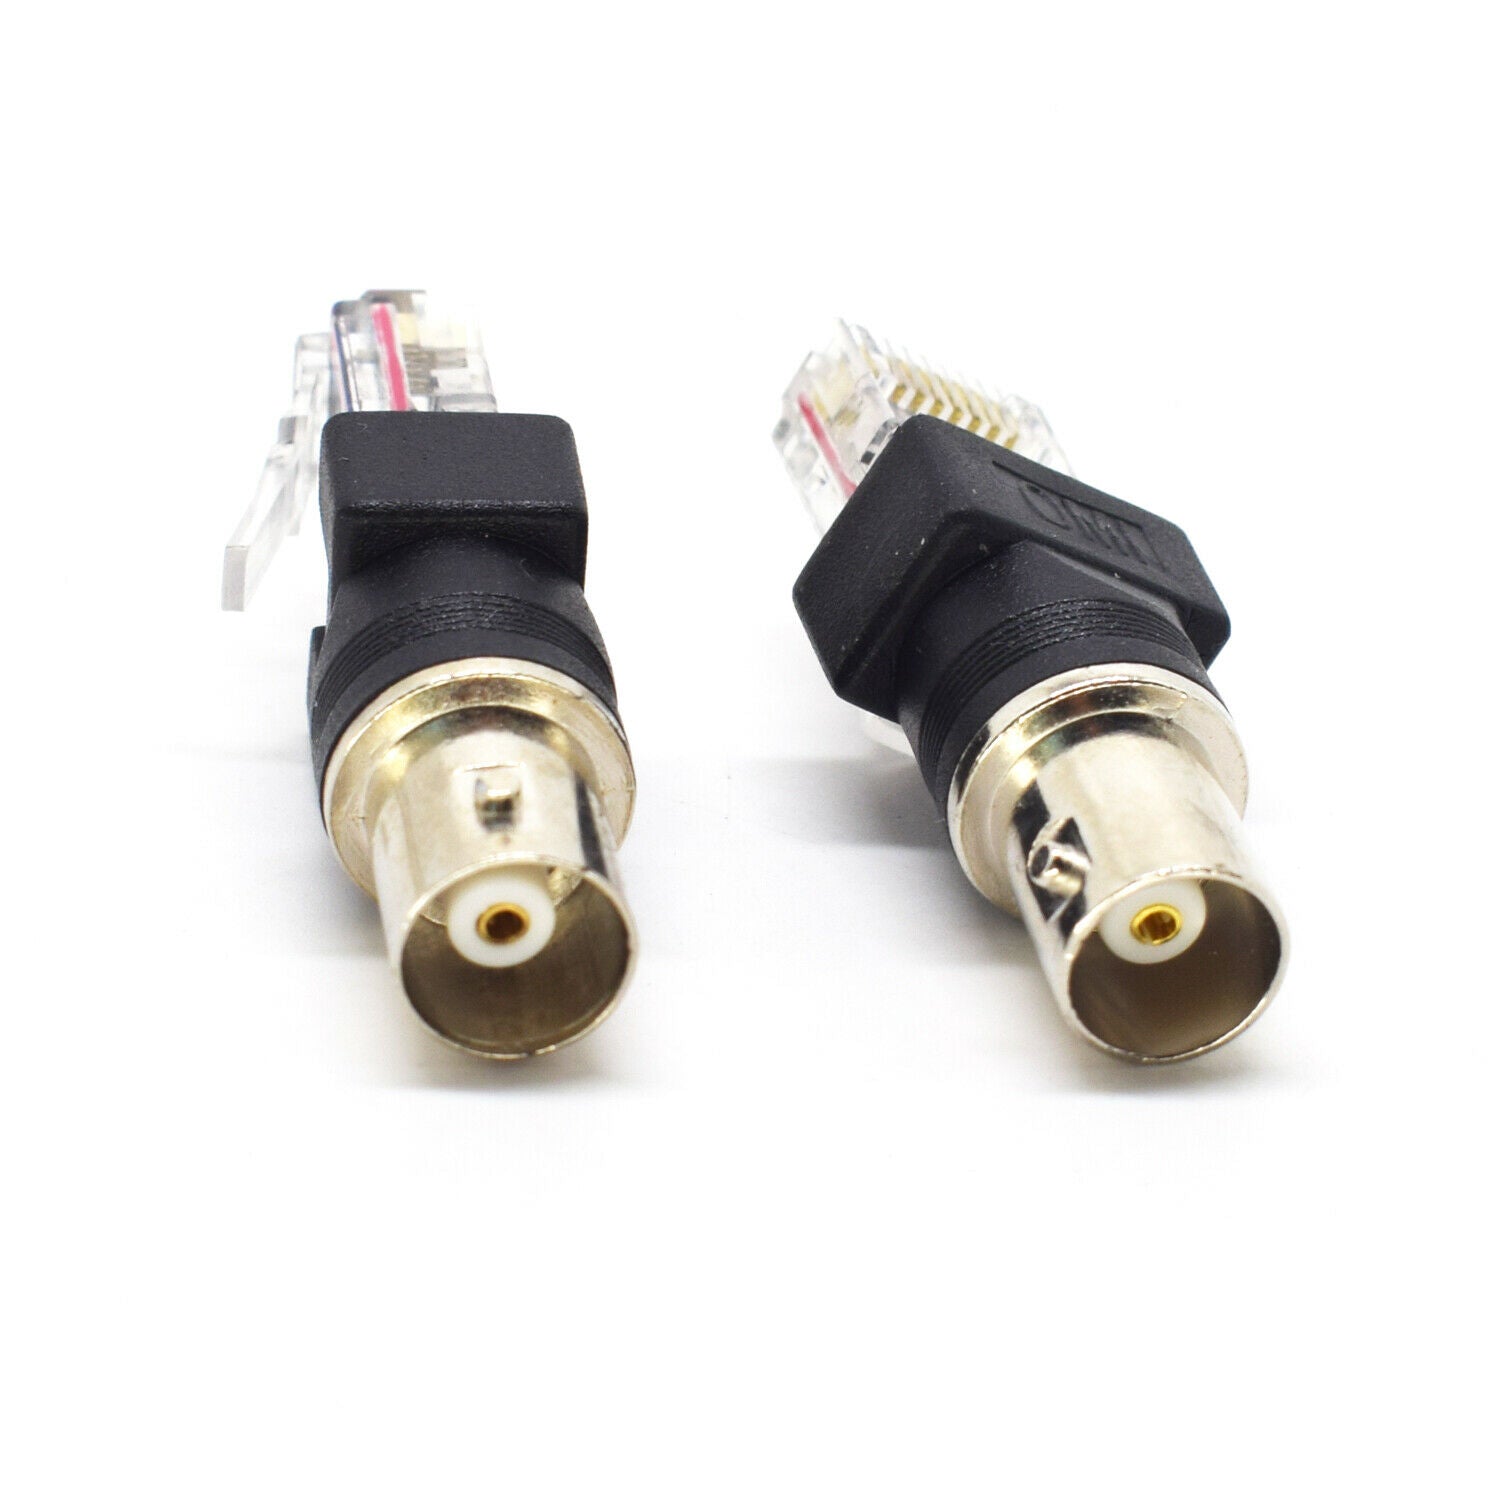 1pc BNC Female to RJ45 Plug Adapter Coaxial Barrel Coupler Adapter Connector